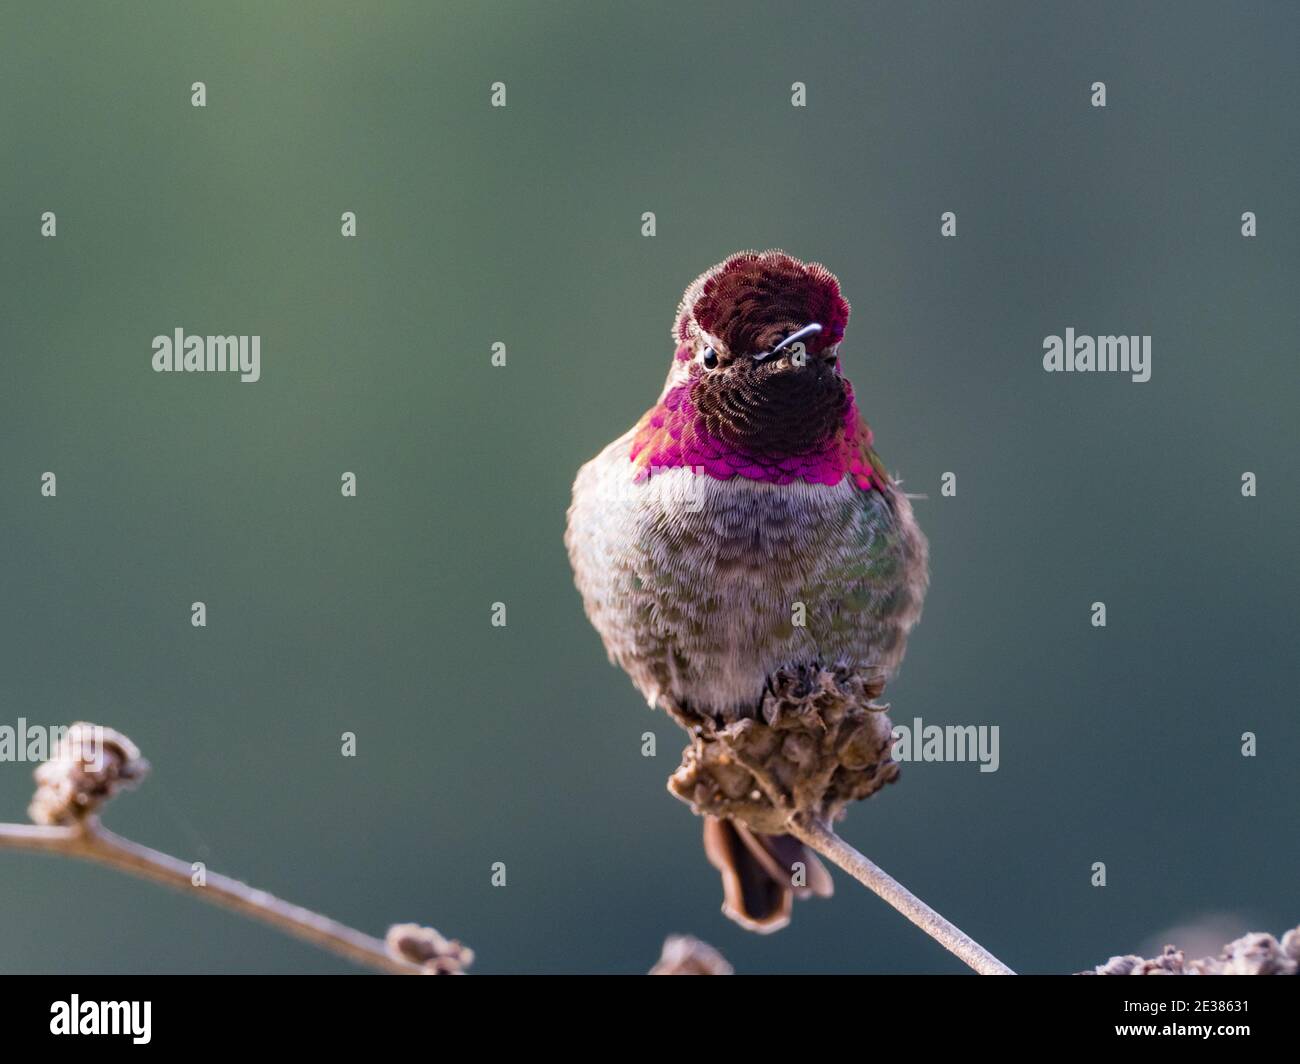 Anna's Hummingbird, Calypte anna, a bird showing its bright gorgeous gorget feathers in La Jolla, California, USA Stock Photo